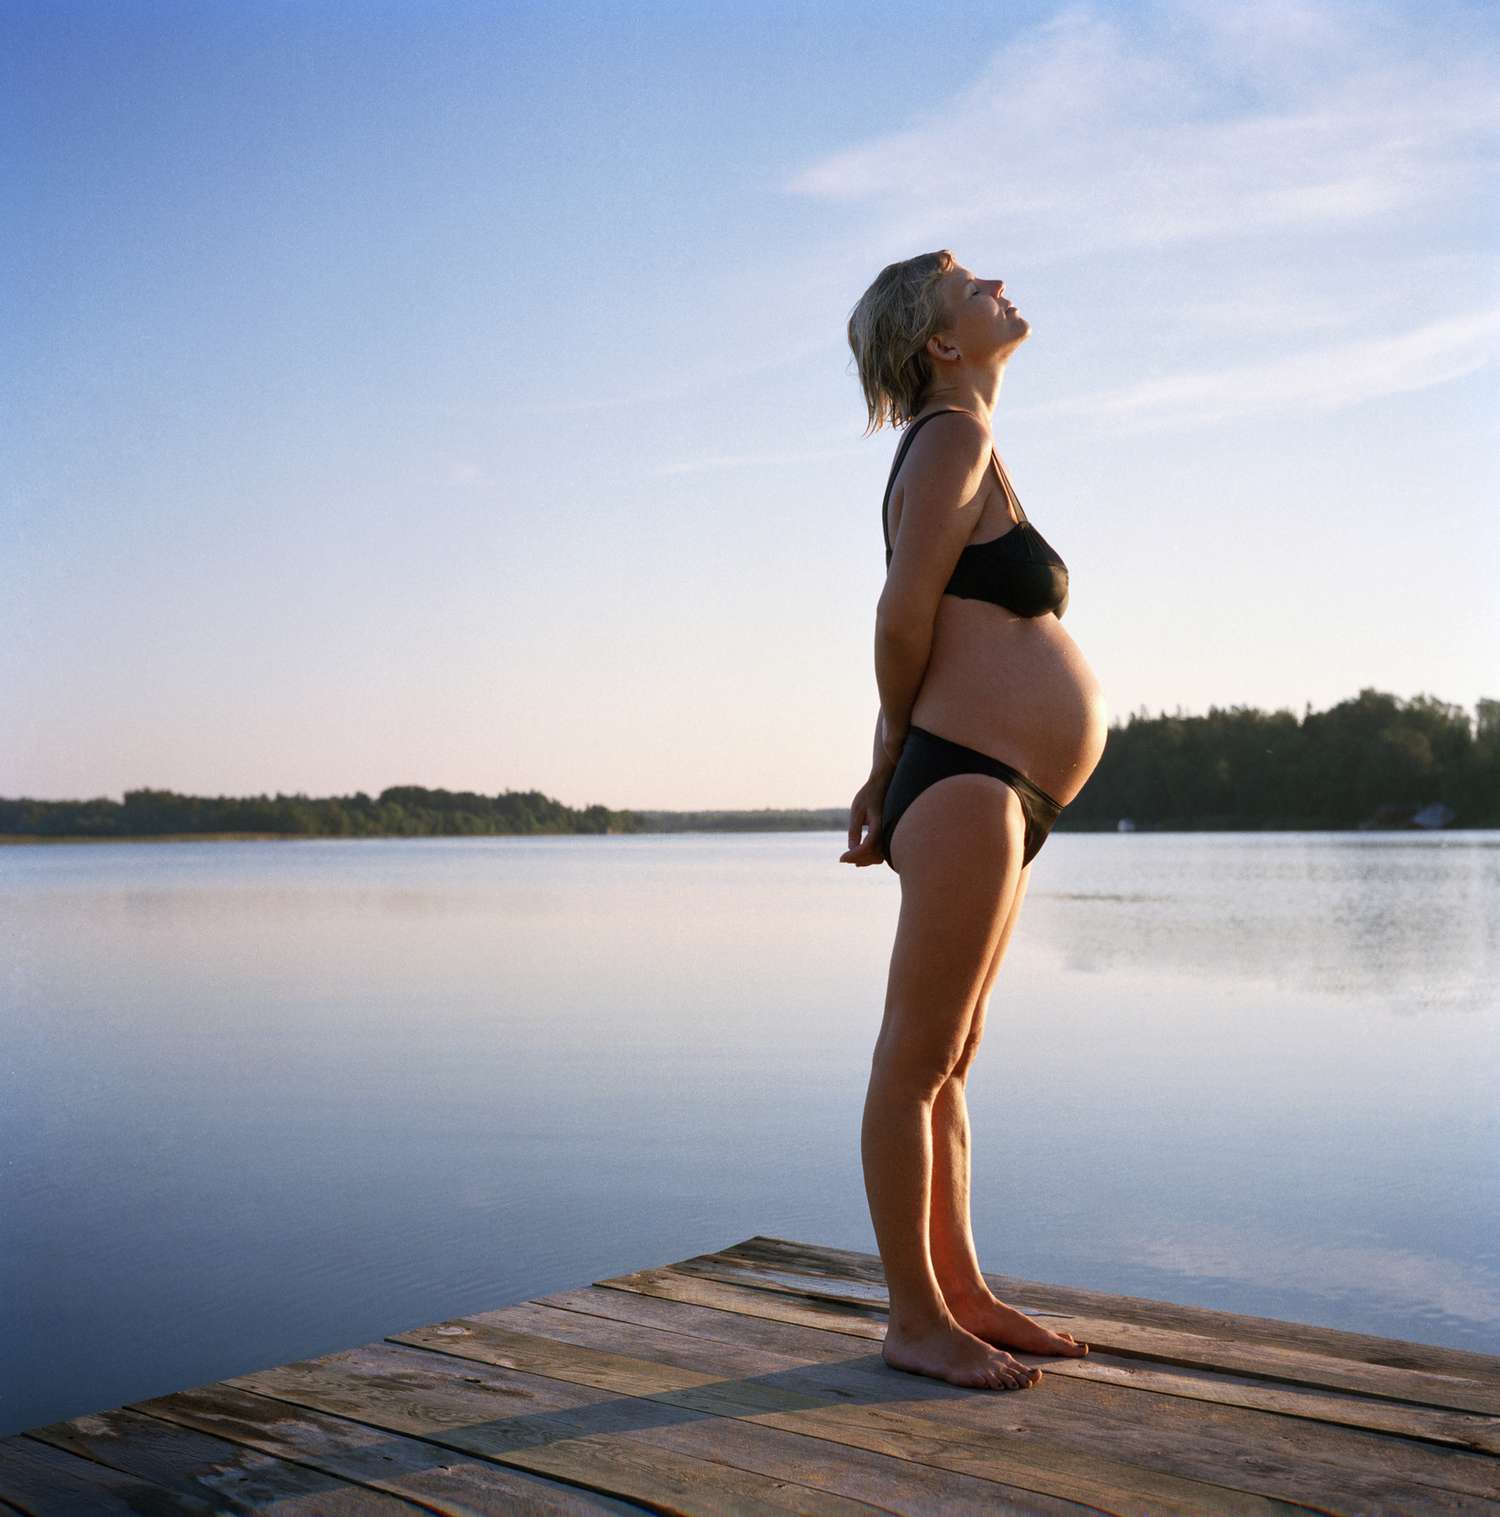 An image of a pregnant woman standing on a jetty at lake